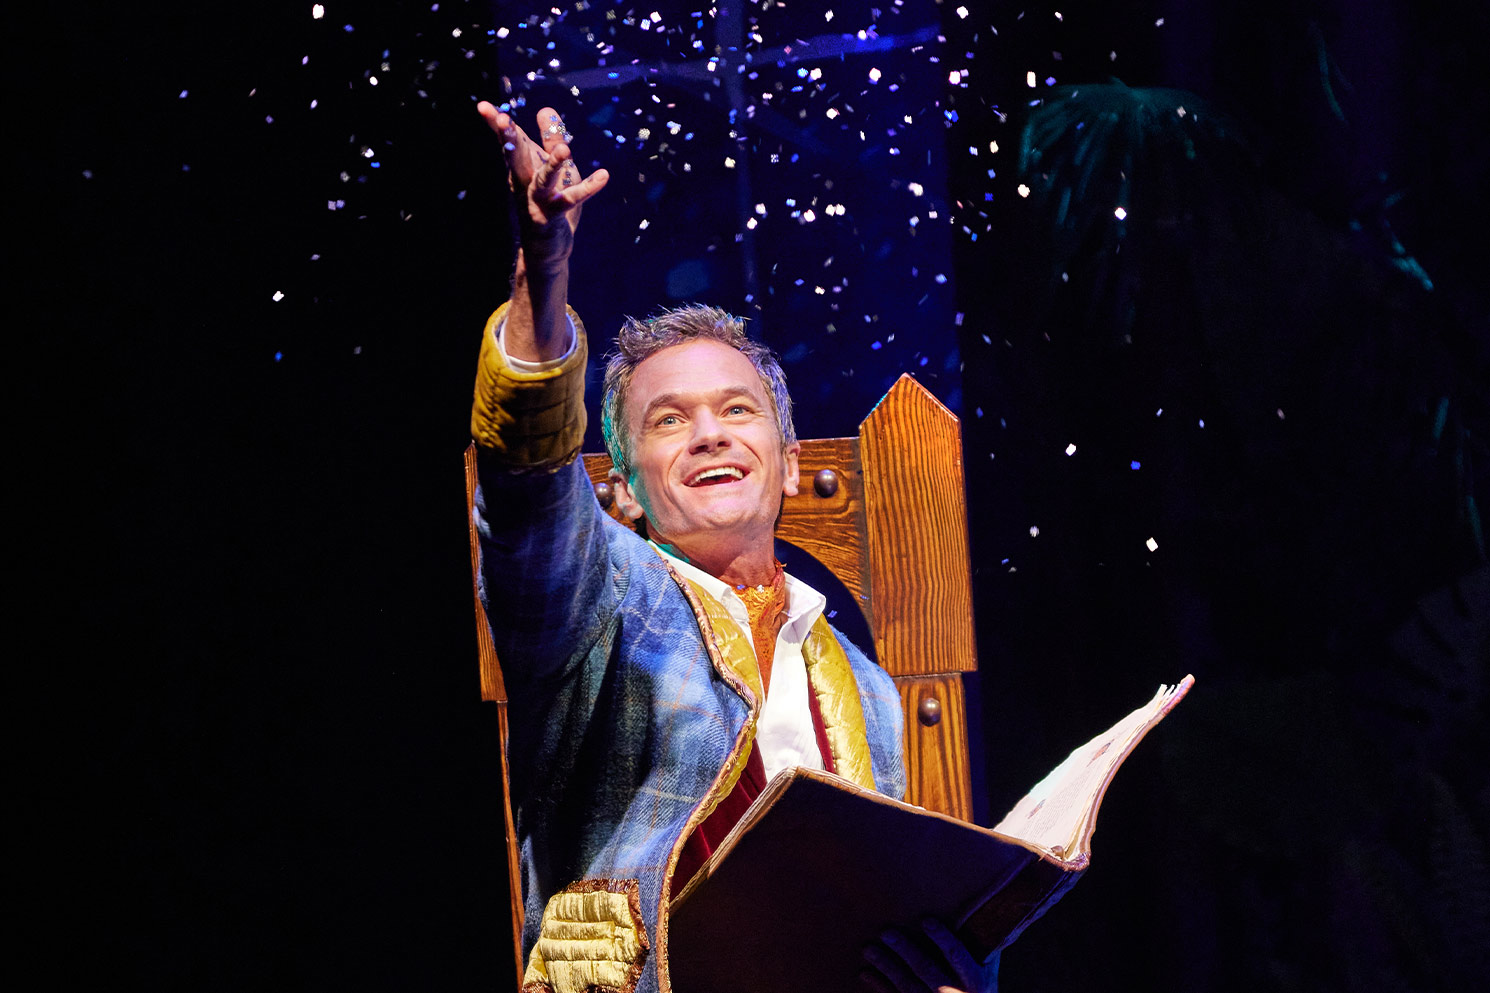 Neil sitting in wooden chair in costume on stage with arm raised as glitter falls from sky